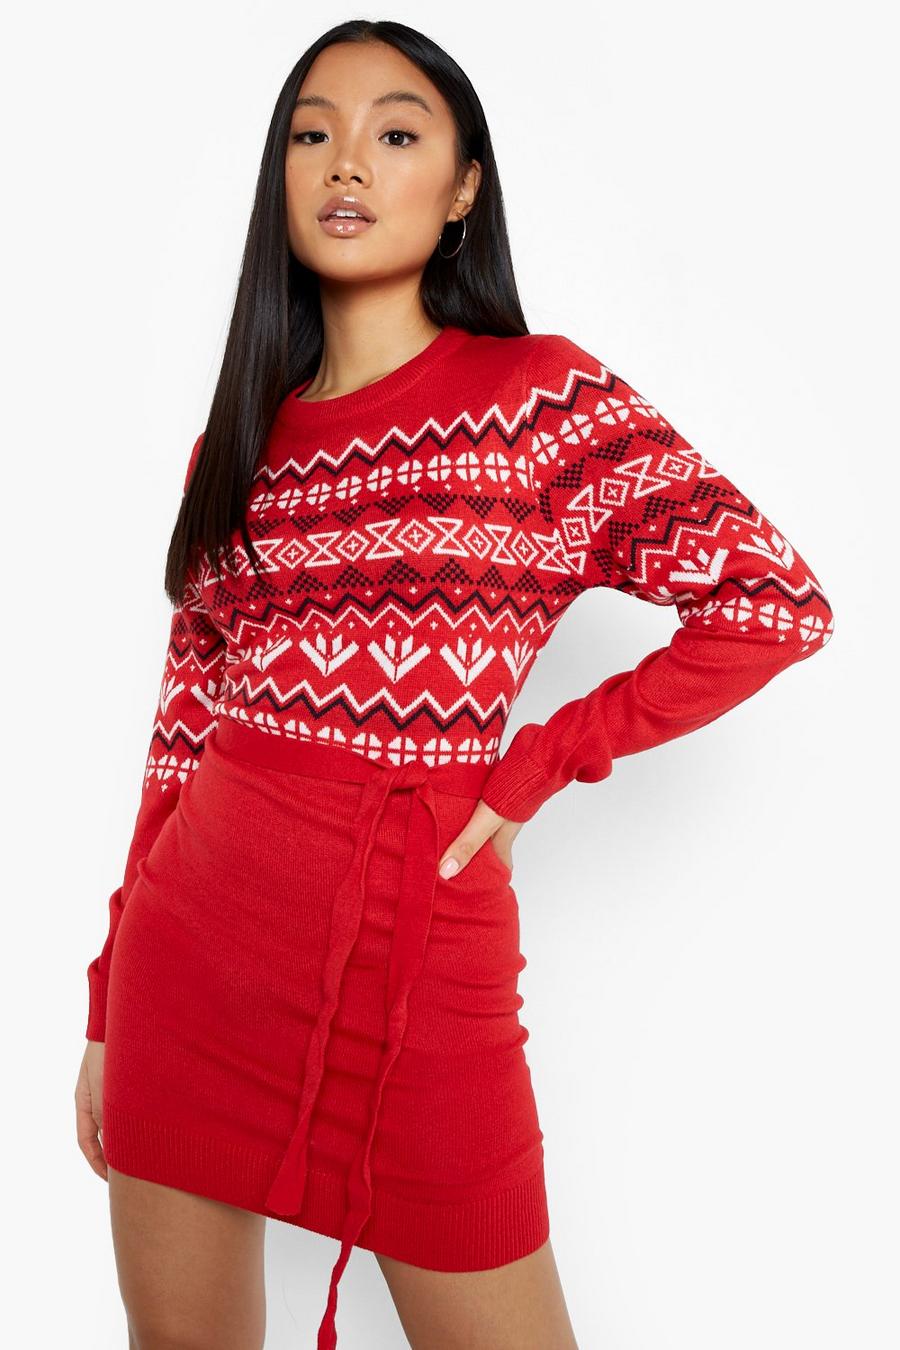 Red Petite Belted Knitted Christmas Sweater Dress image number 1